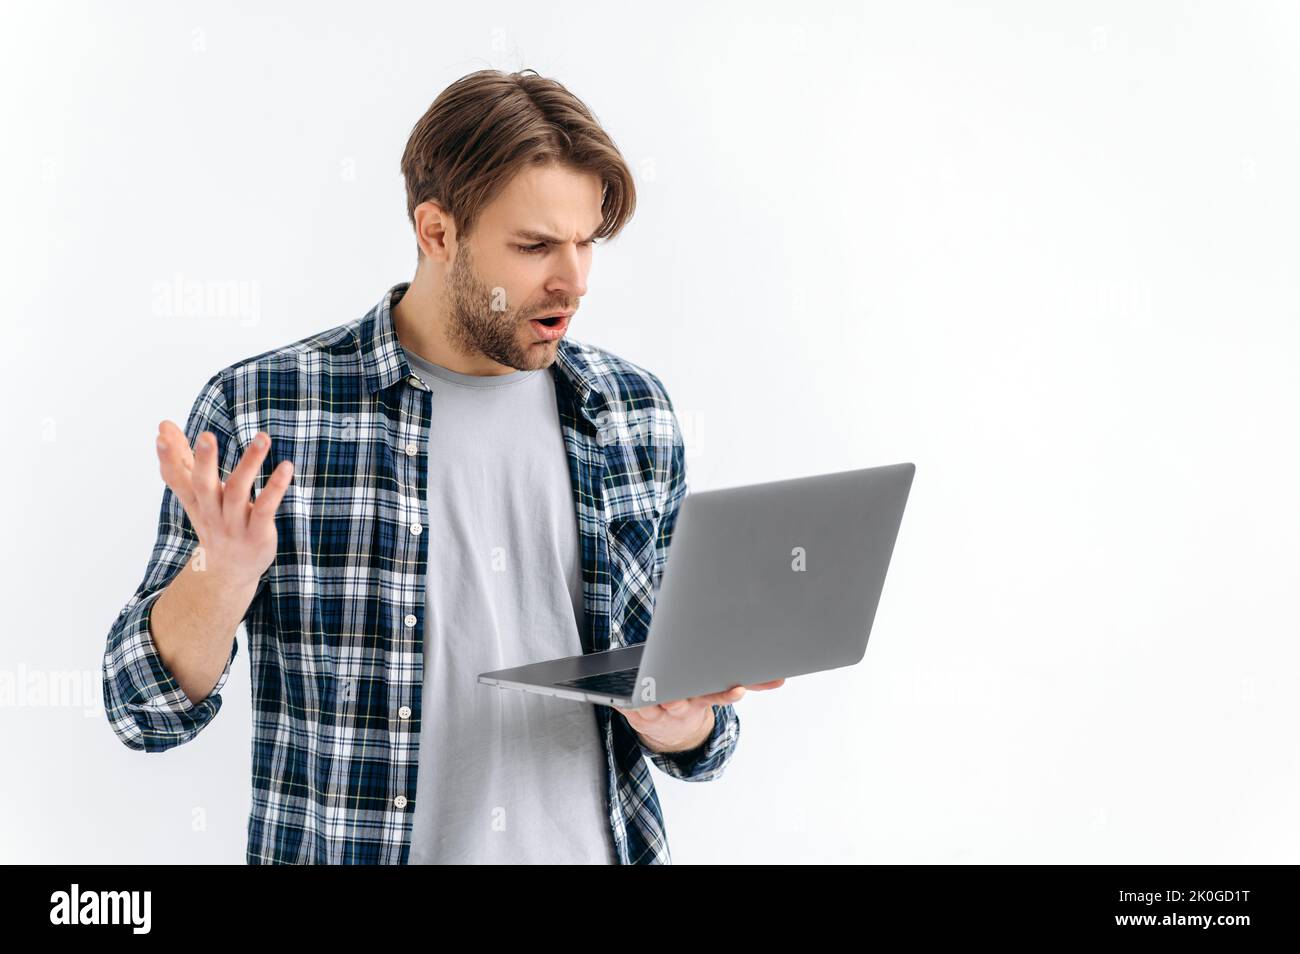 Frustrated confused puzzled caucasian stylish young man, standing on a white isolated background, holds an open laptop, surprised looks at the screen, see unexpected news, message, gesturing with hand Stock Photo